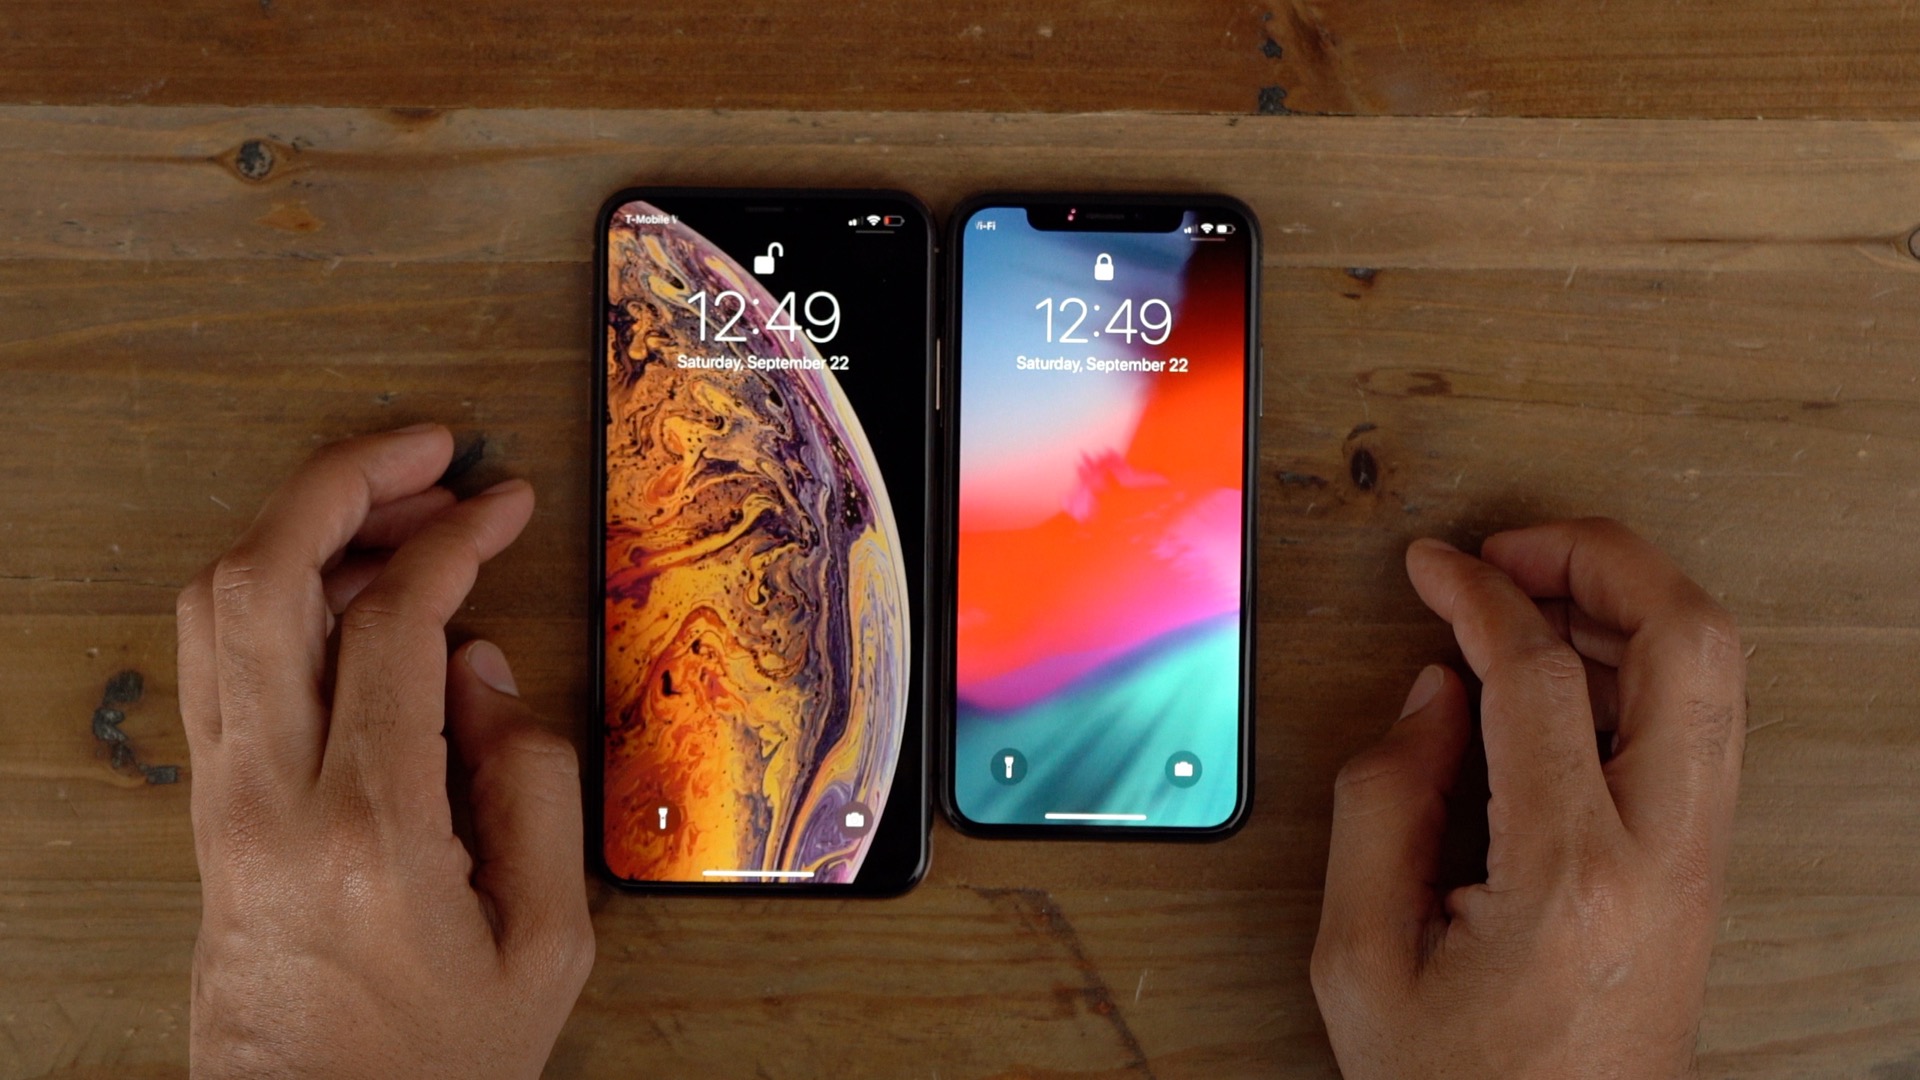 Iphone Xs Max Earns Displaymate’s ‘best Smartphone Display Award’ With Near ’perfect Calibration